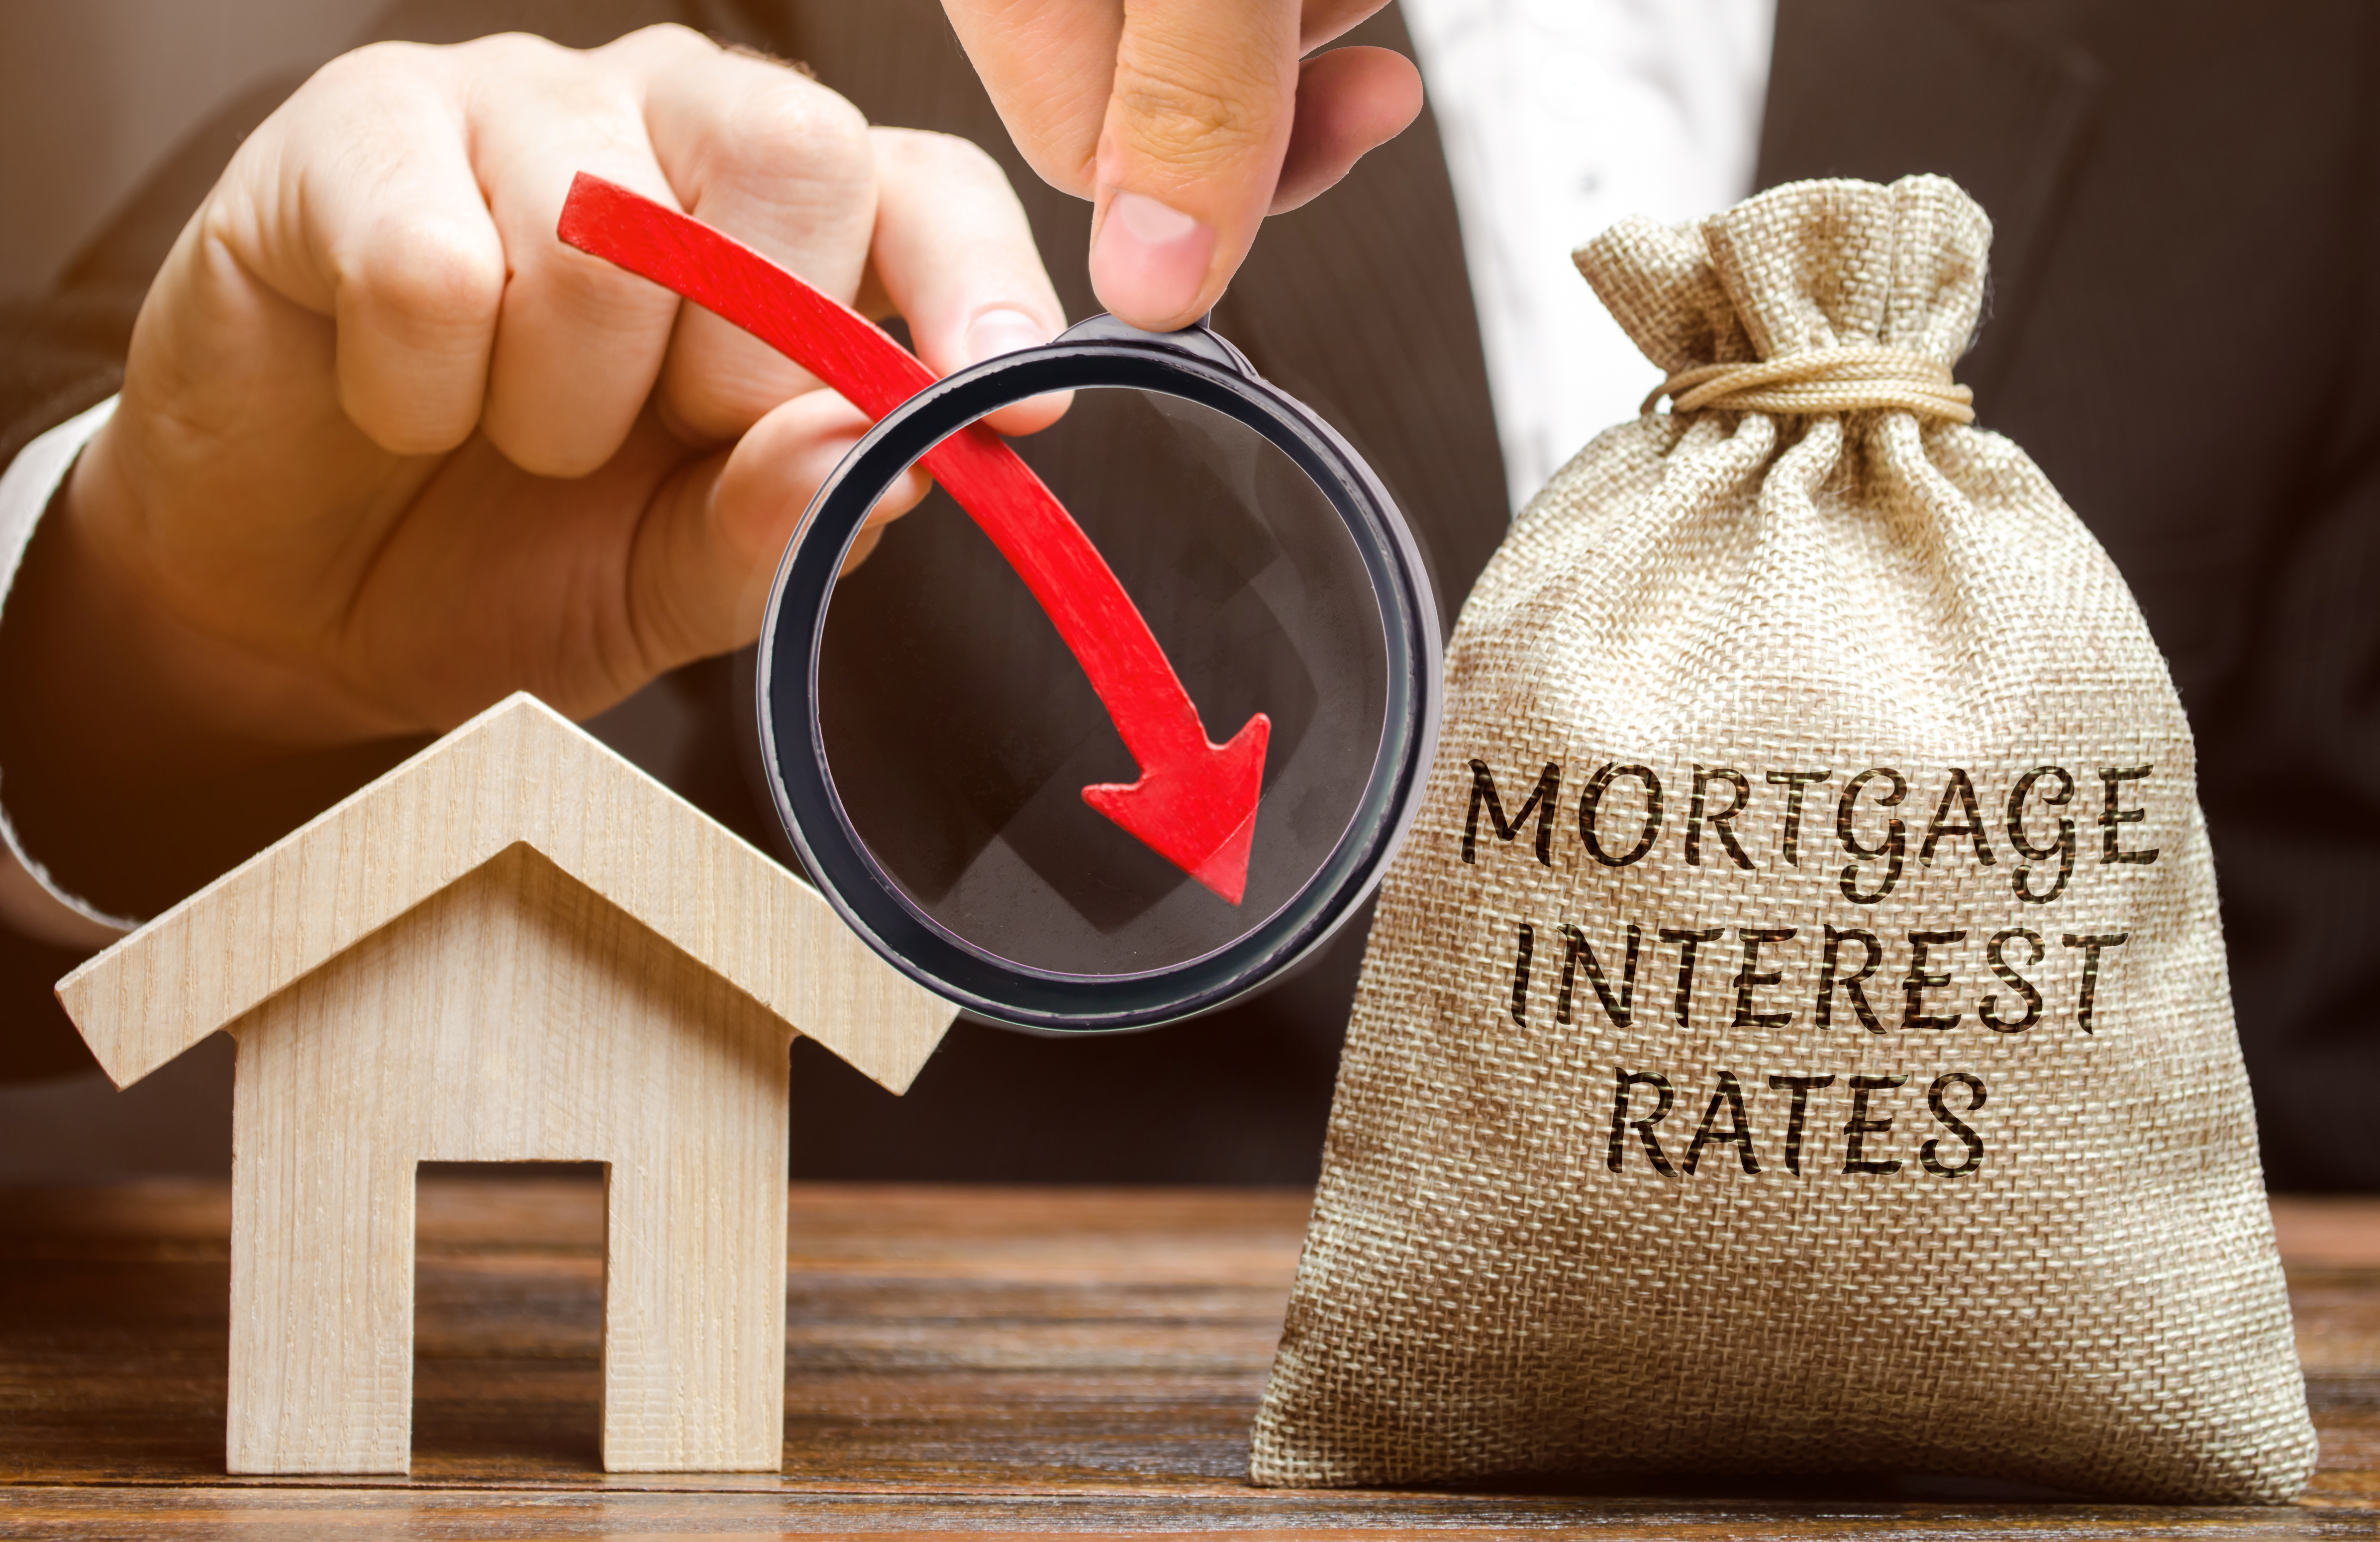 A lender has launched 2019’s cheapest mortgage so far at 0.98%, but is it worth the risk?